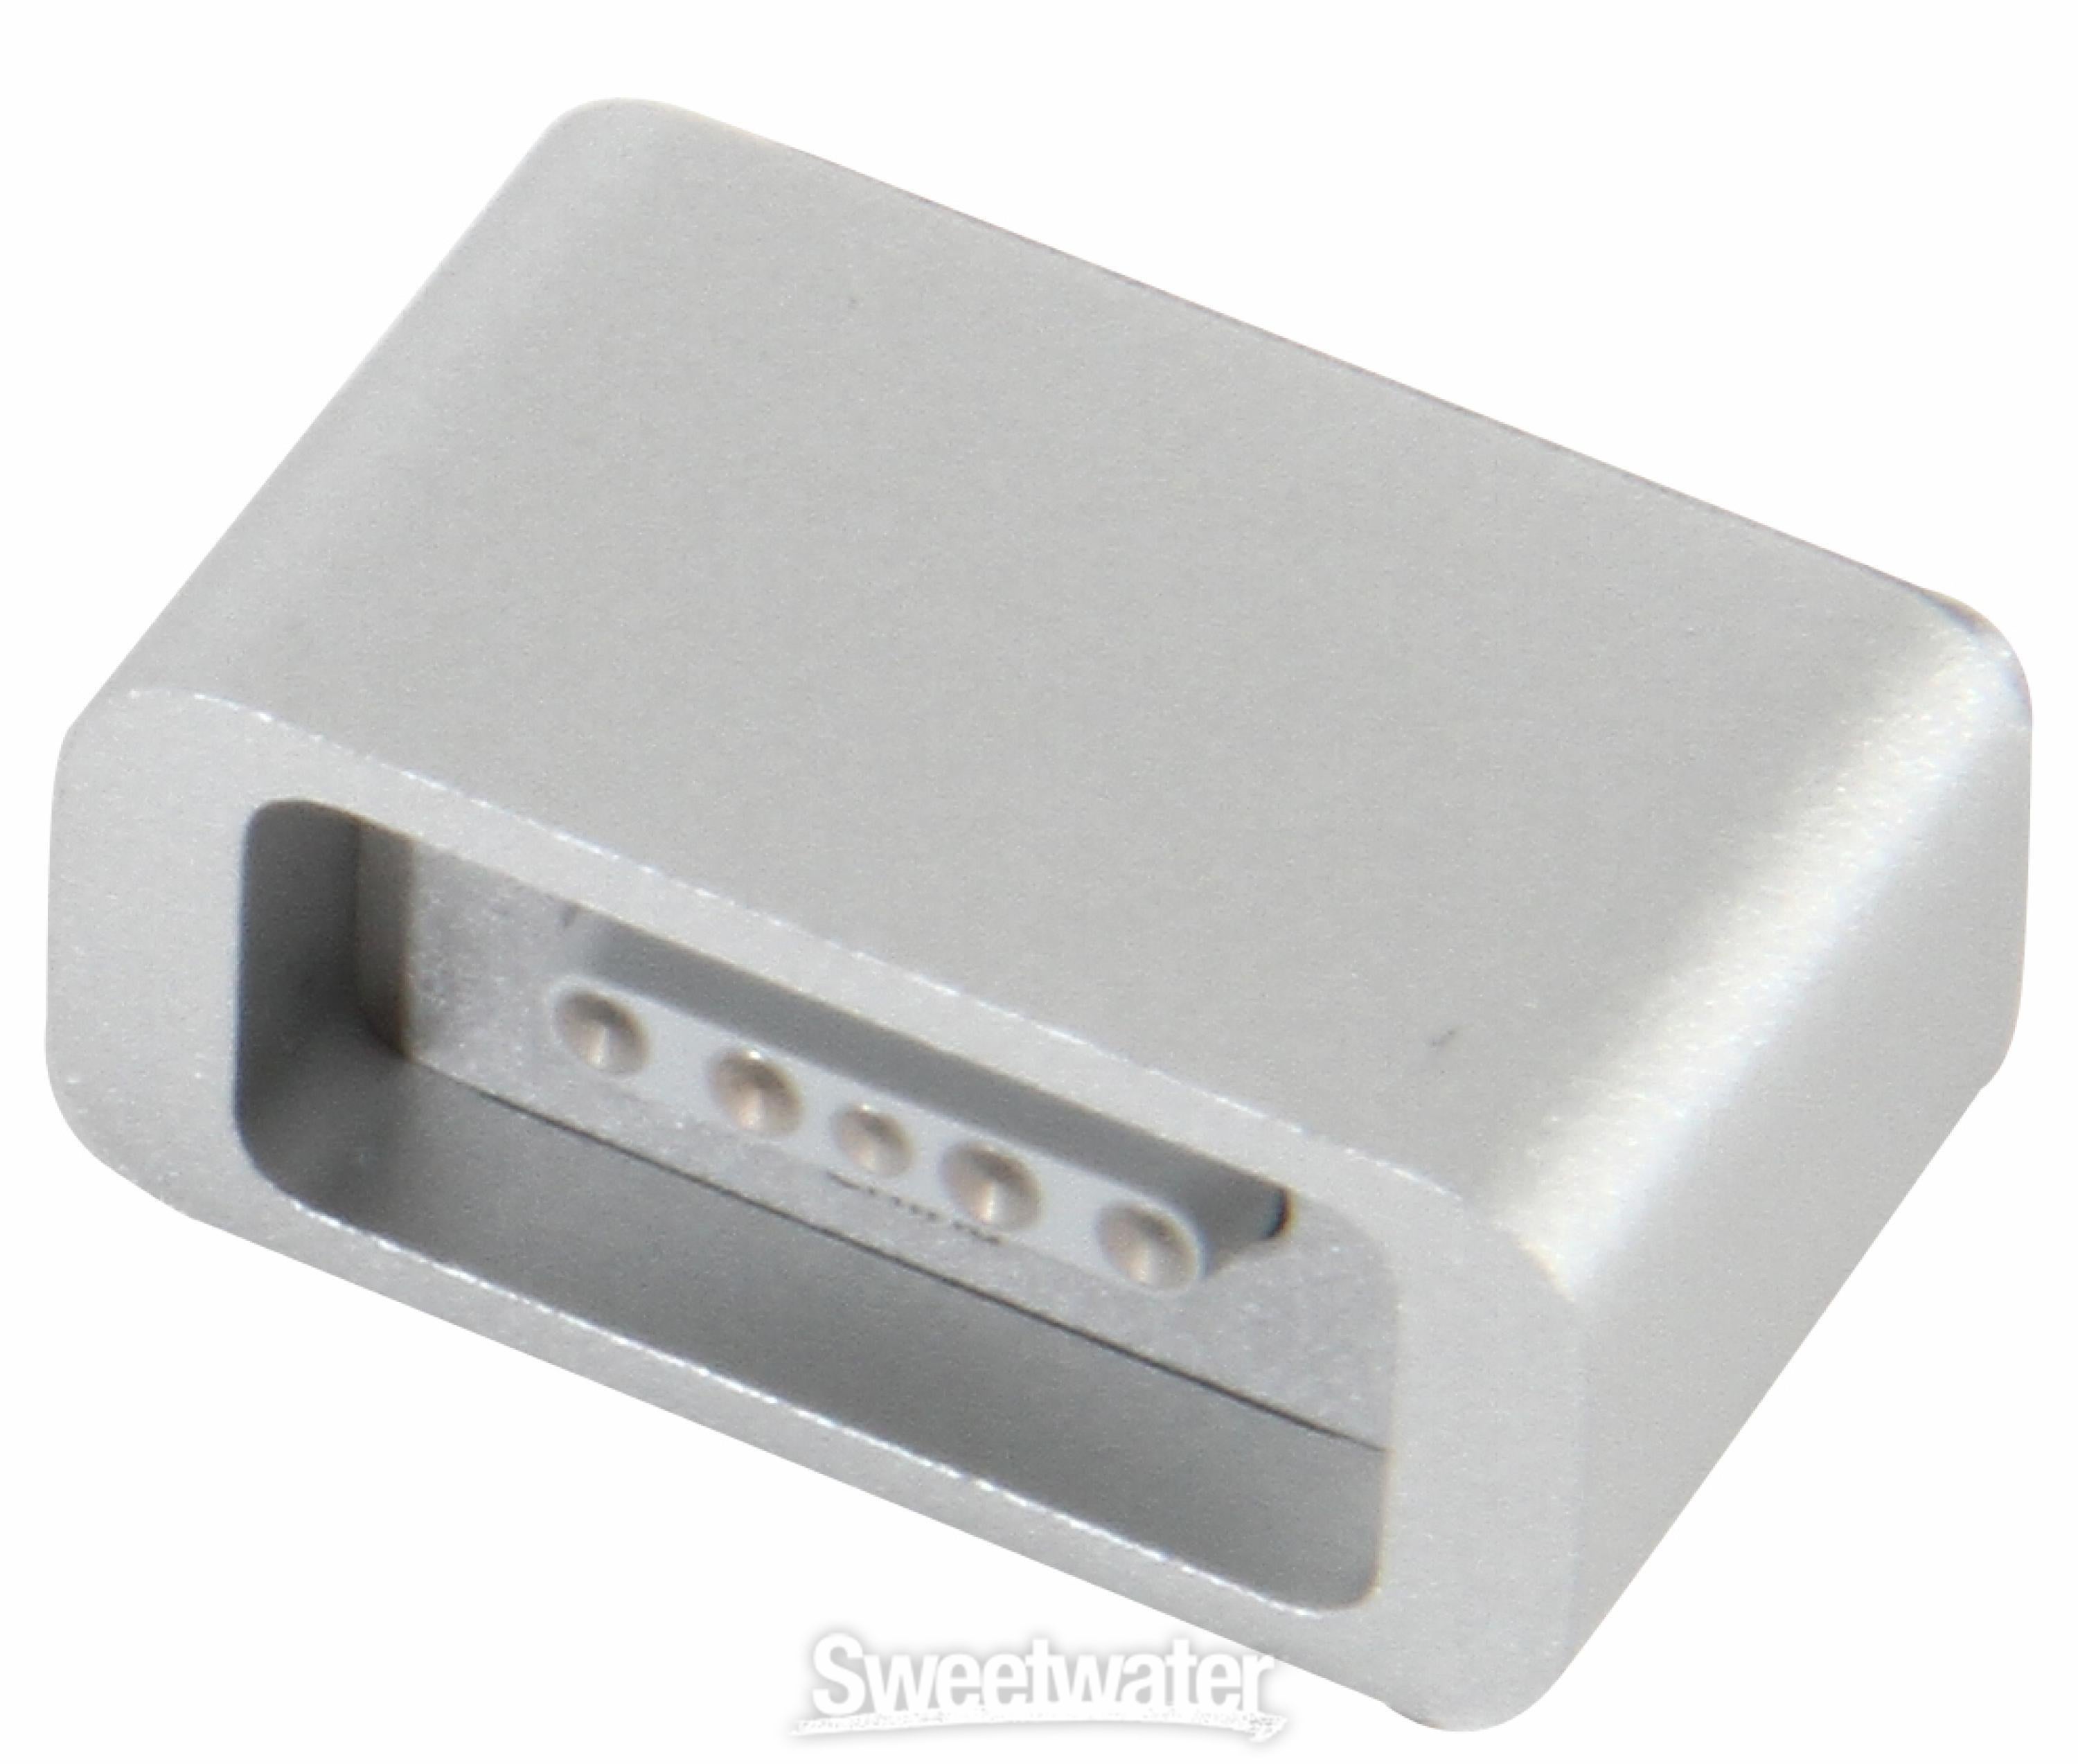 Apple MagSafe to MagSafe 2 Converter | Sweetwater